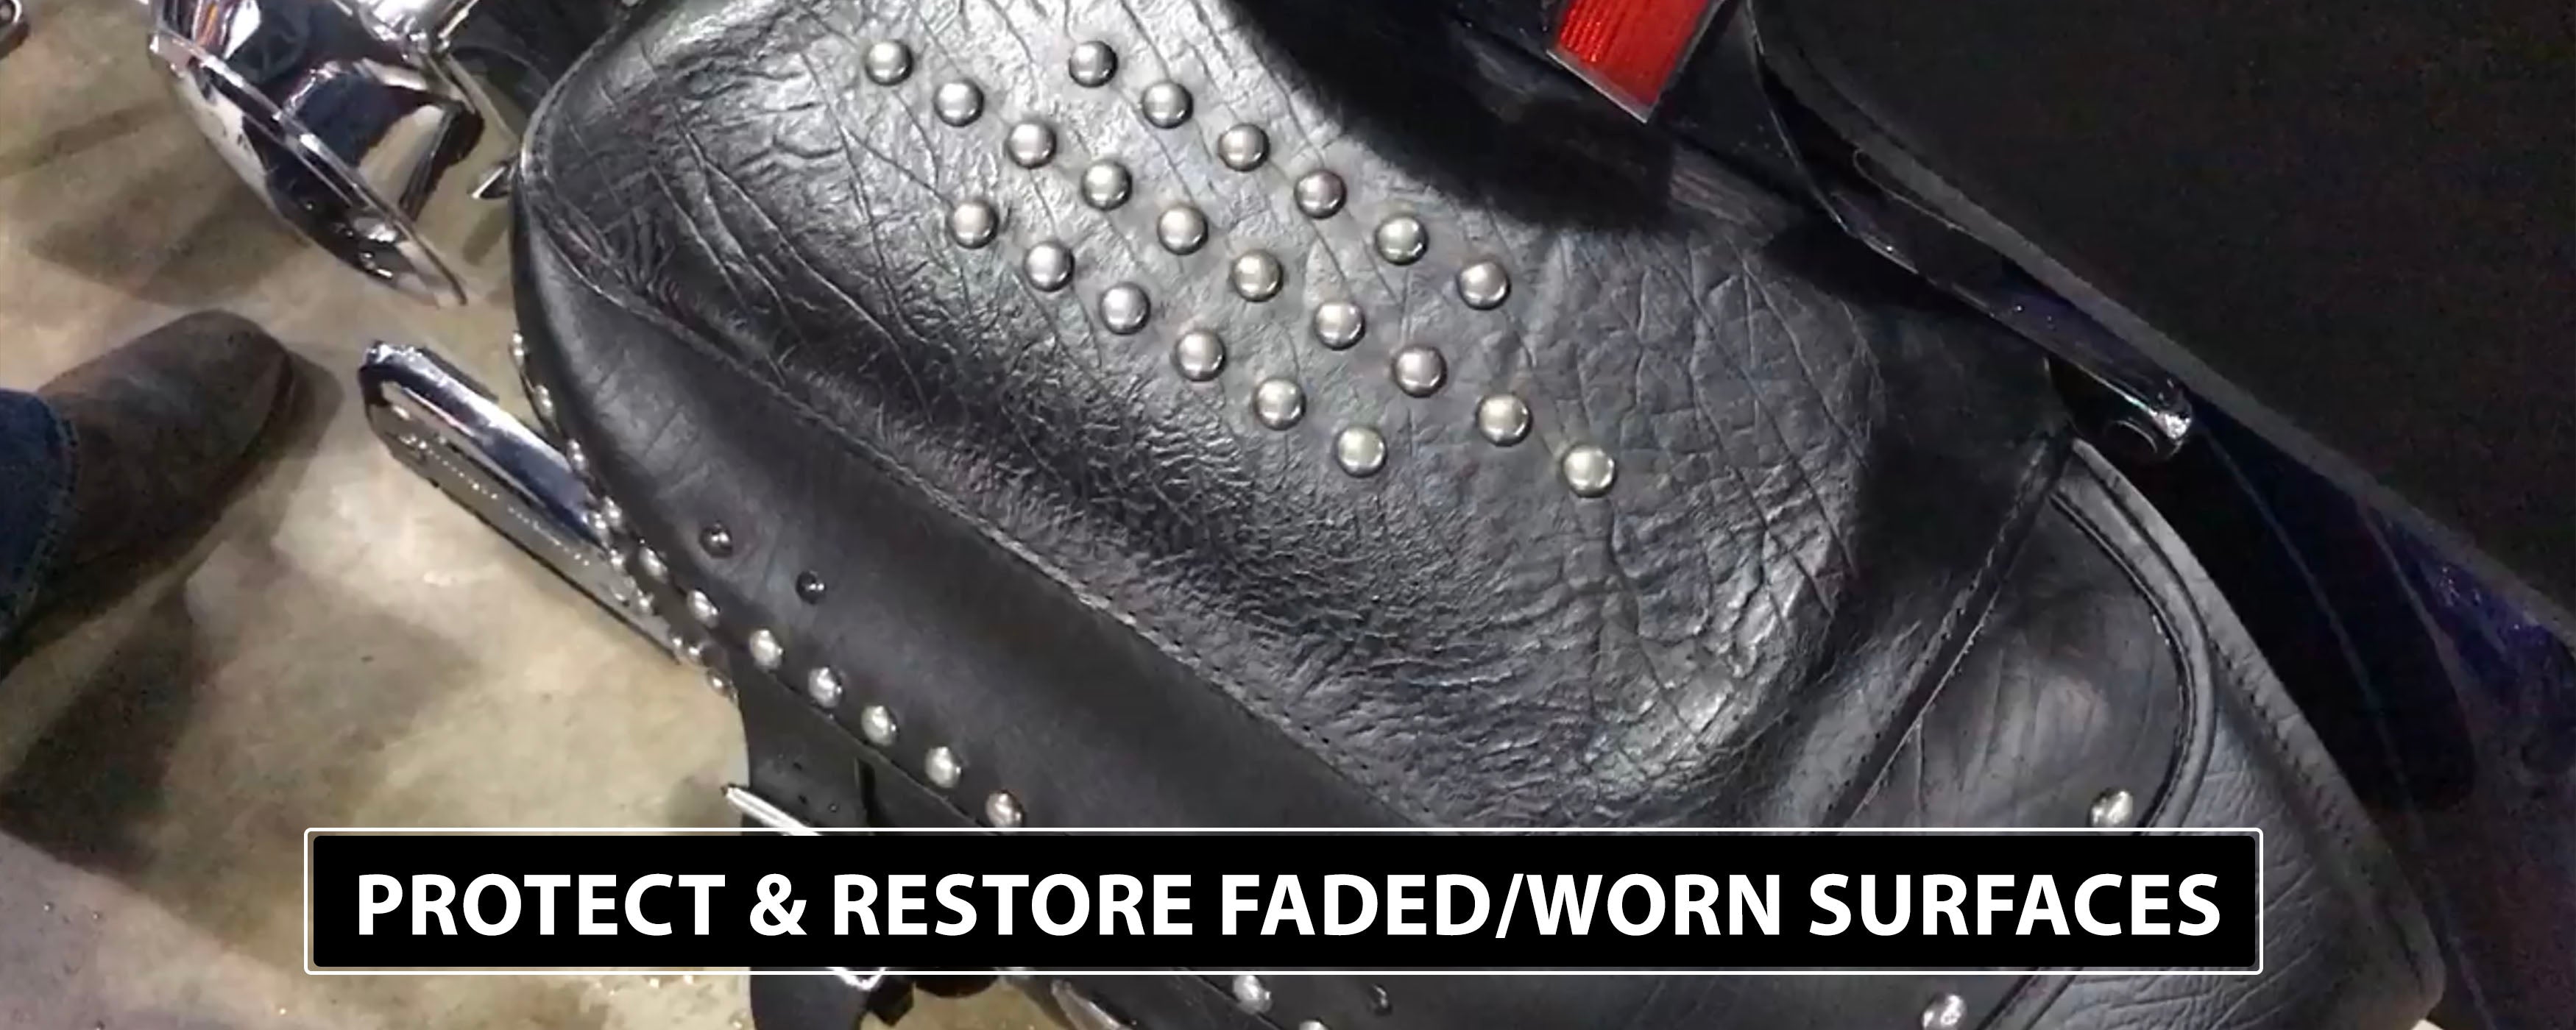 How To Best Protect & Restore Faded or Worn Surfaces